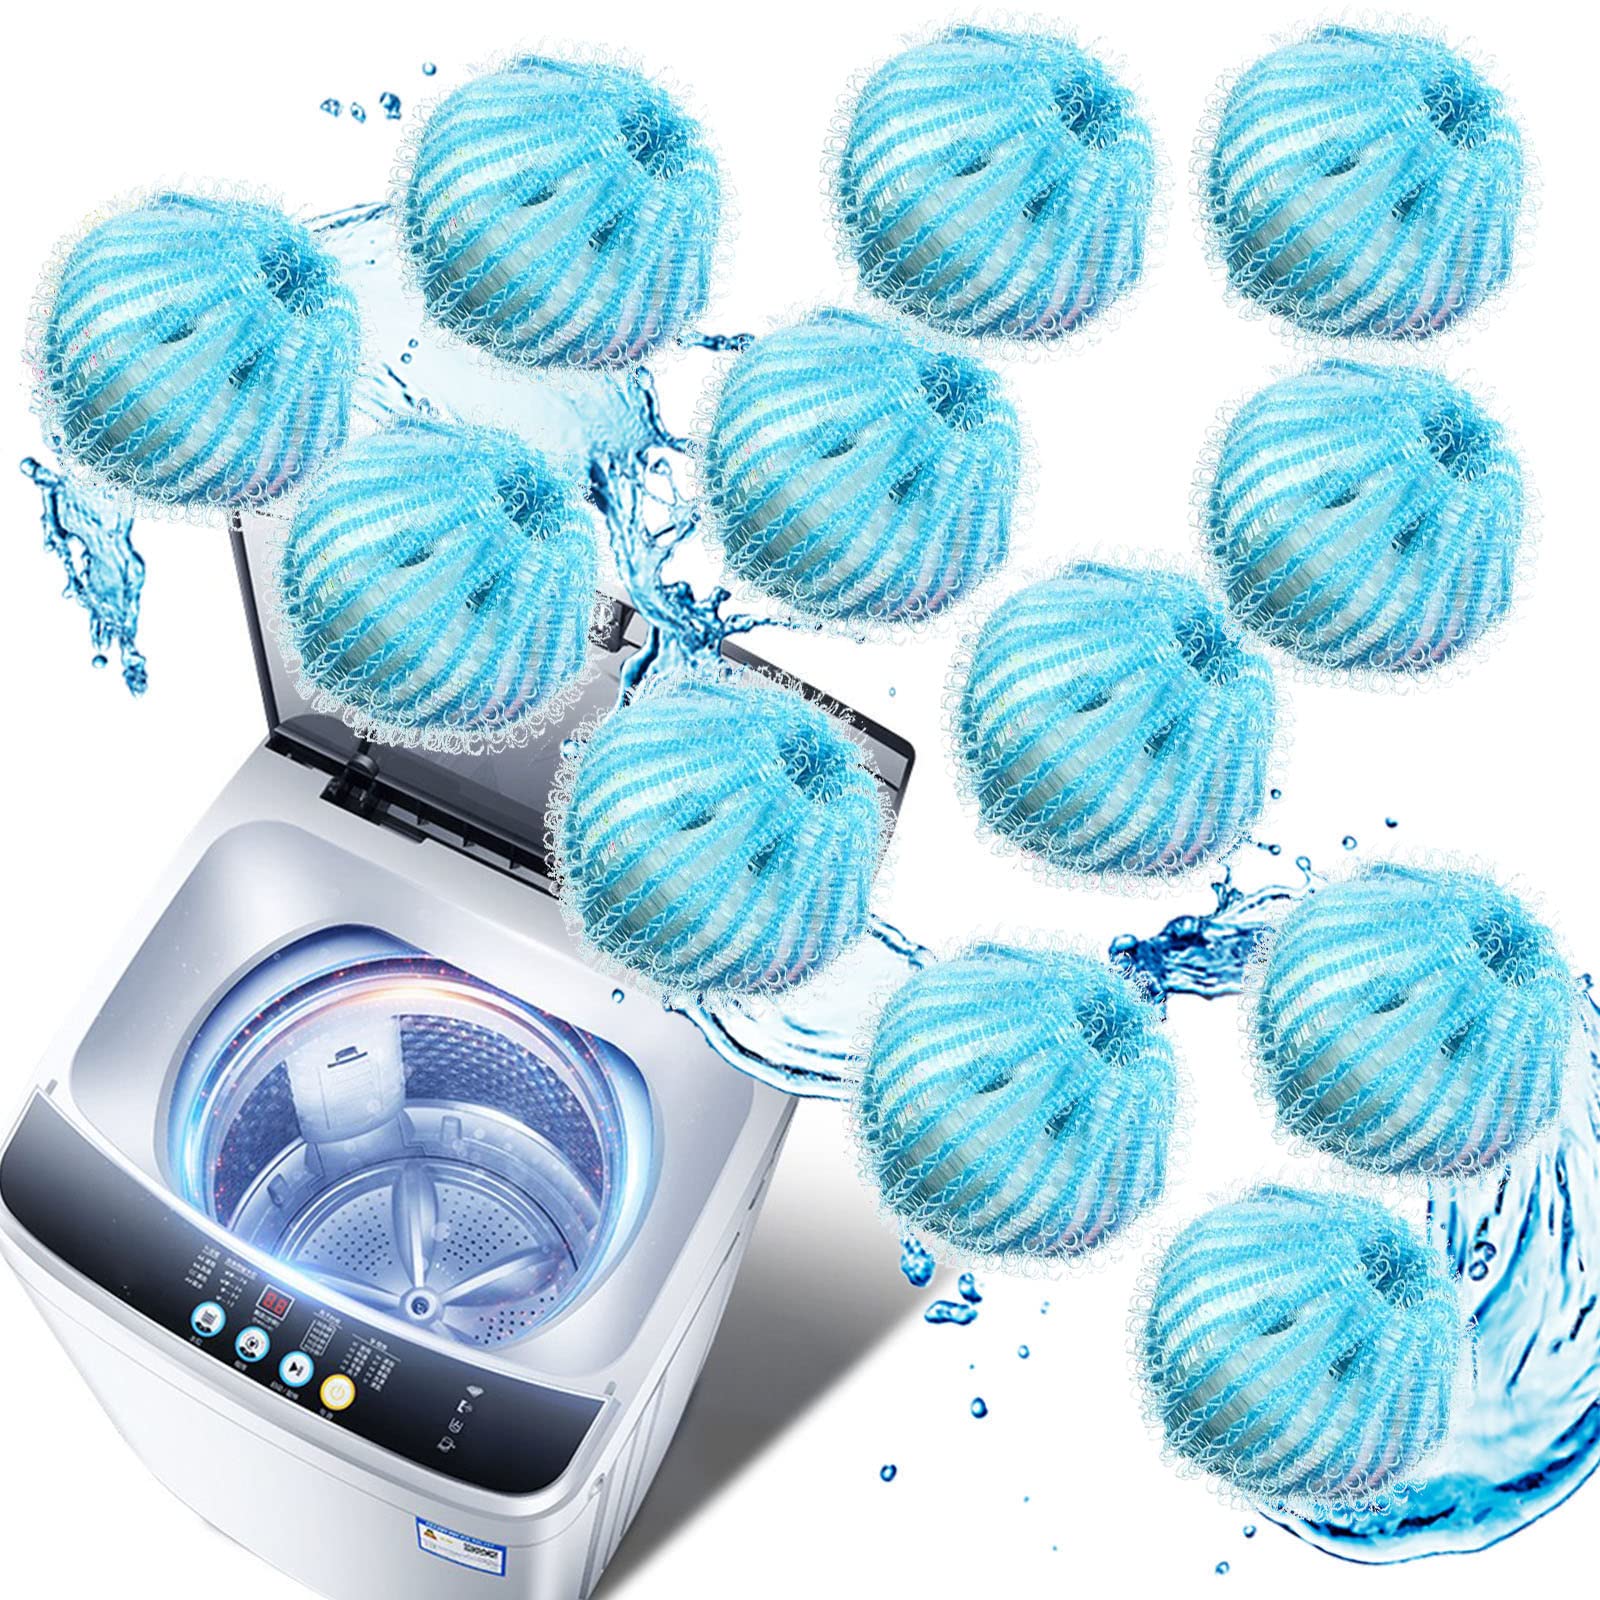 Pet-Hair-Remover-for-Laundry Lint-and-Pet-Hair-Remover-Balls-for